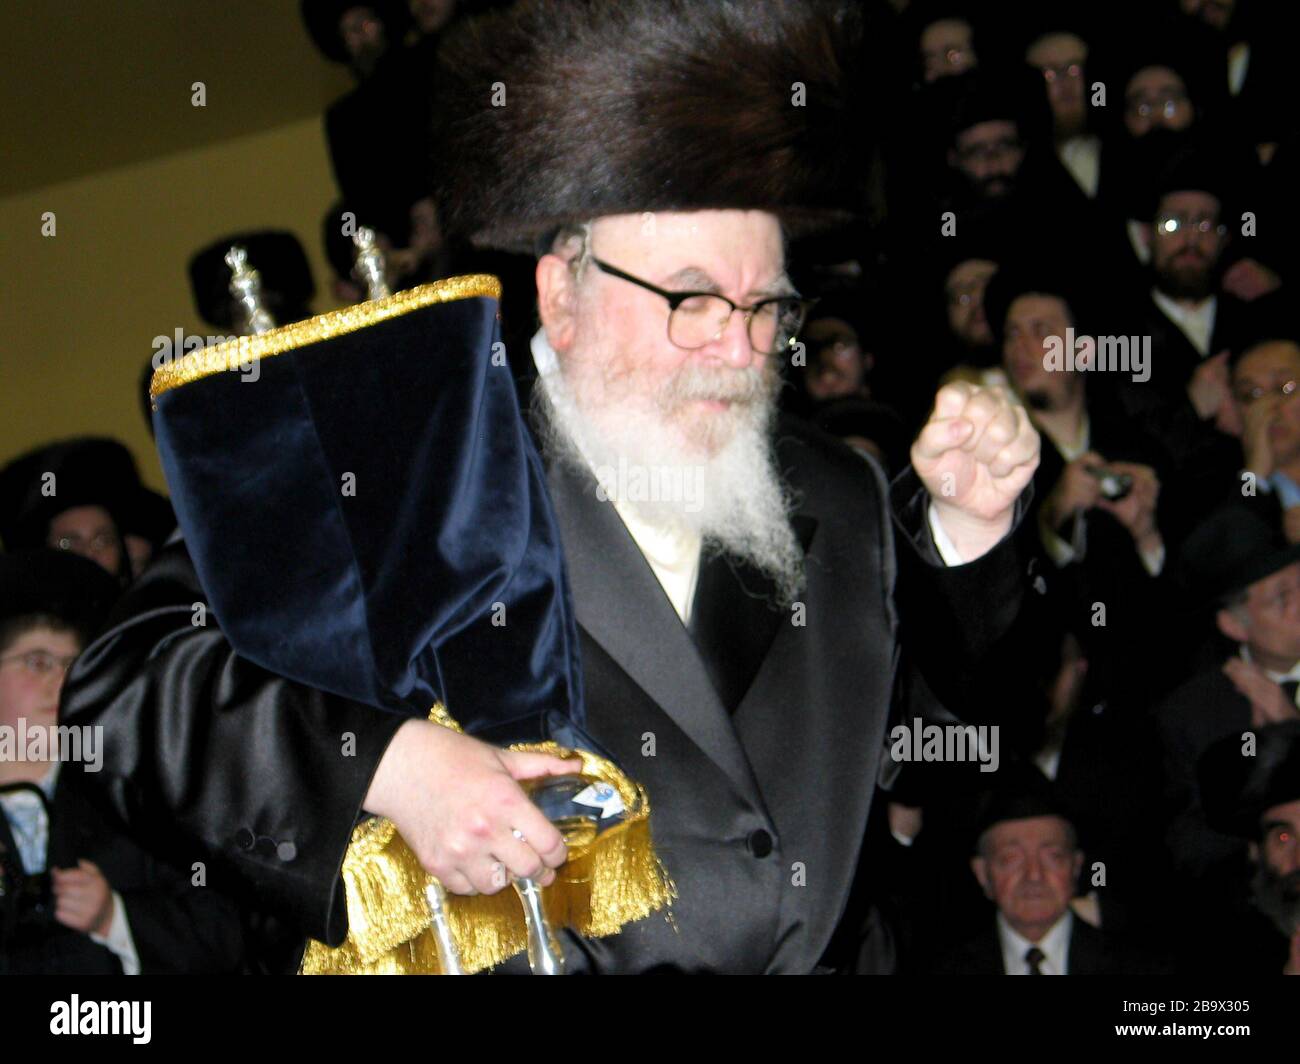 English: David Twersky (Skverer Rebbe), a scion of the Chernobyl dynasty,  dancing with Torah (2005) I took the photo. There are no rights reserved.;  31 October 2005 (original upload date); Own work;